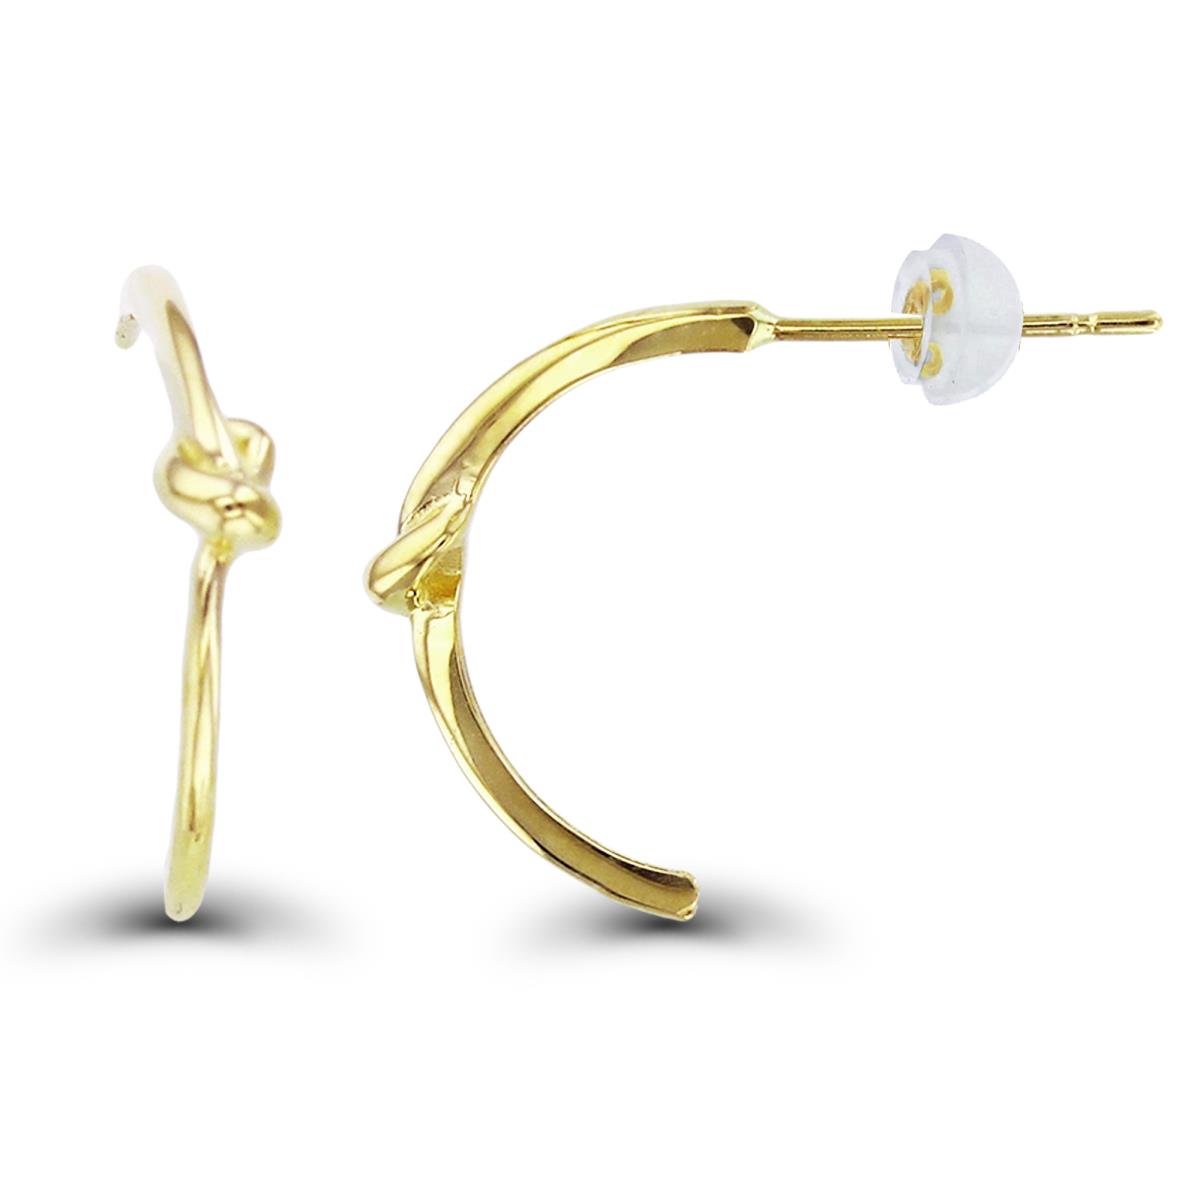 10K Yellow Gold High Polish Knot J-Earrings with Silicon Backs